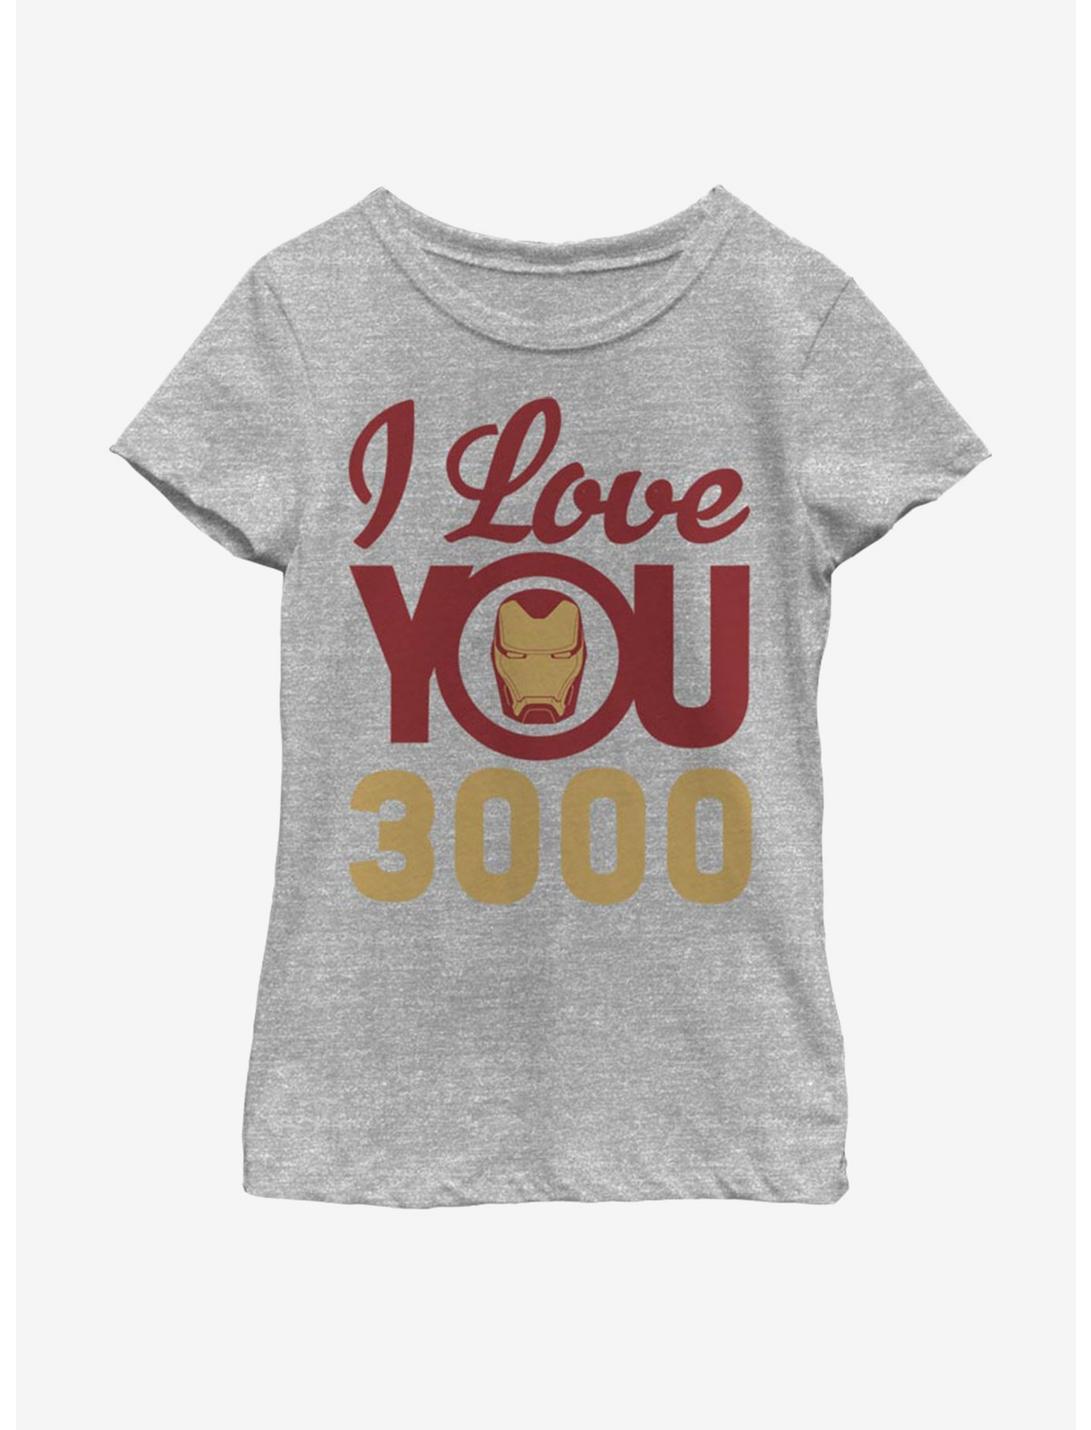 Marvel Iron Man Love You 3000 Icon Face Youth Girls T-Shirt, ATH HTR, hi-res